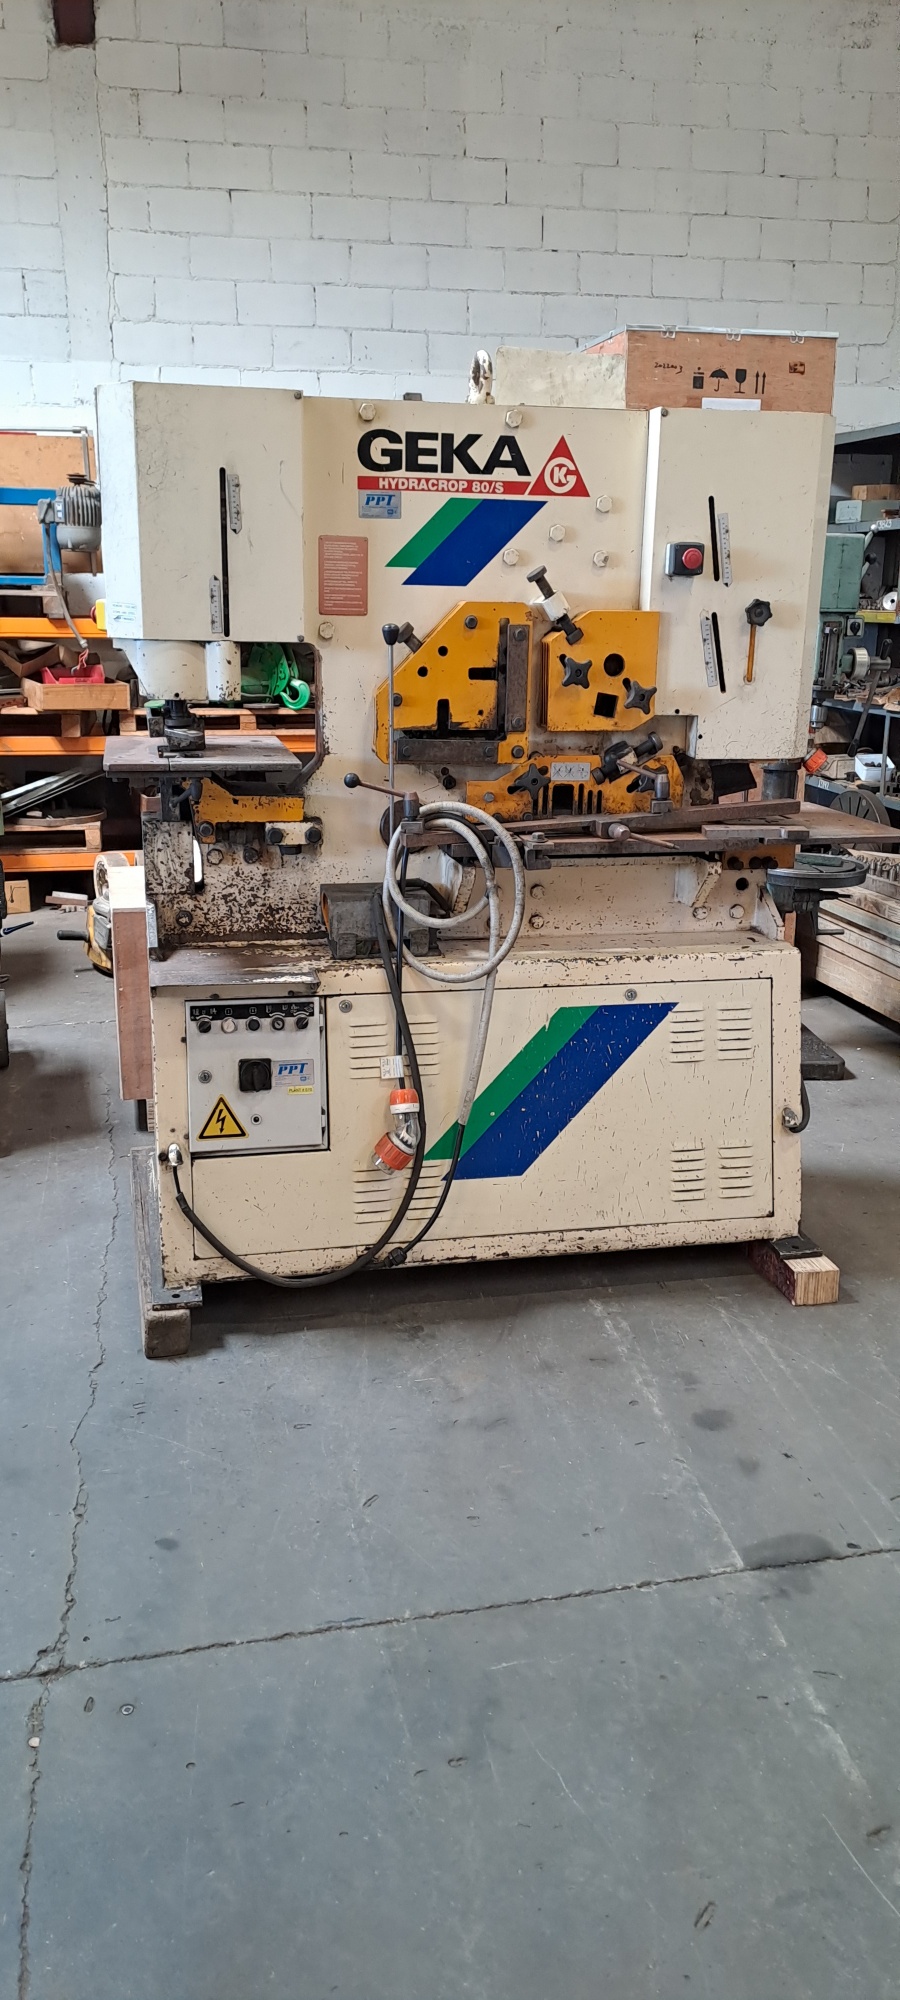 Punch and Shear Geka 80S, 3 phase, lots of tooling, very tidy.